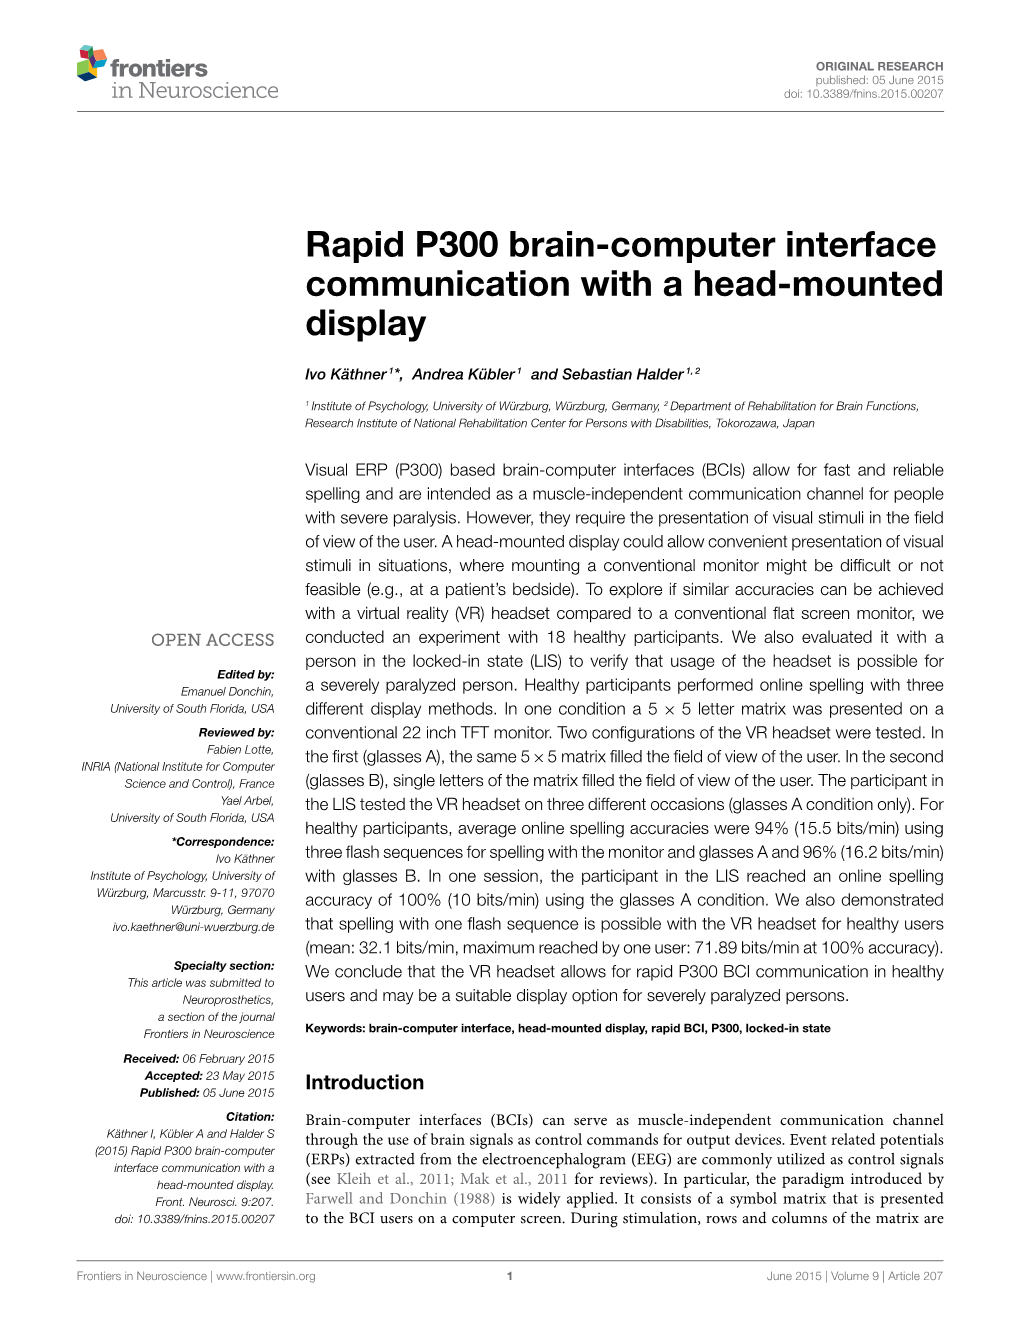 Rapid P300 Brain-Computer Interface Communication with a Head-Mounted Display